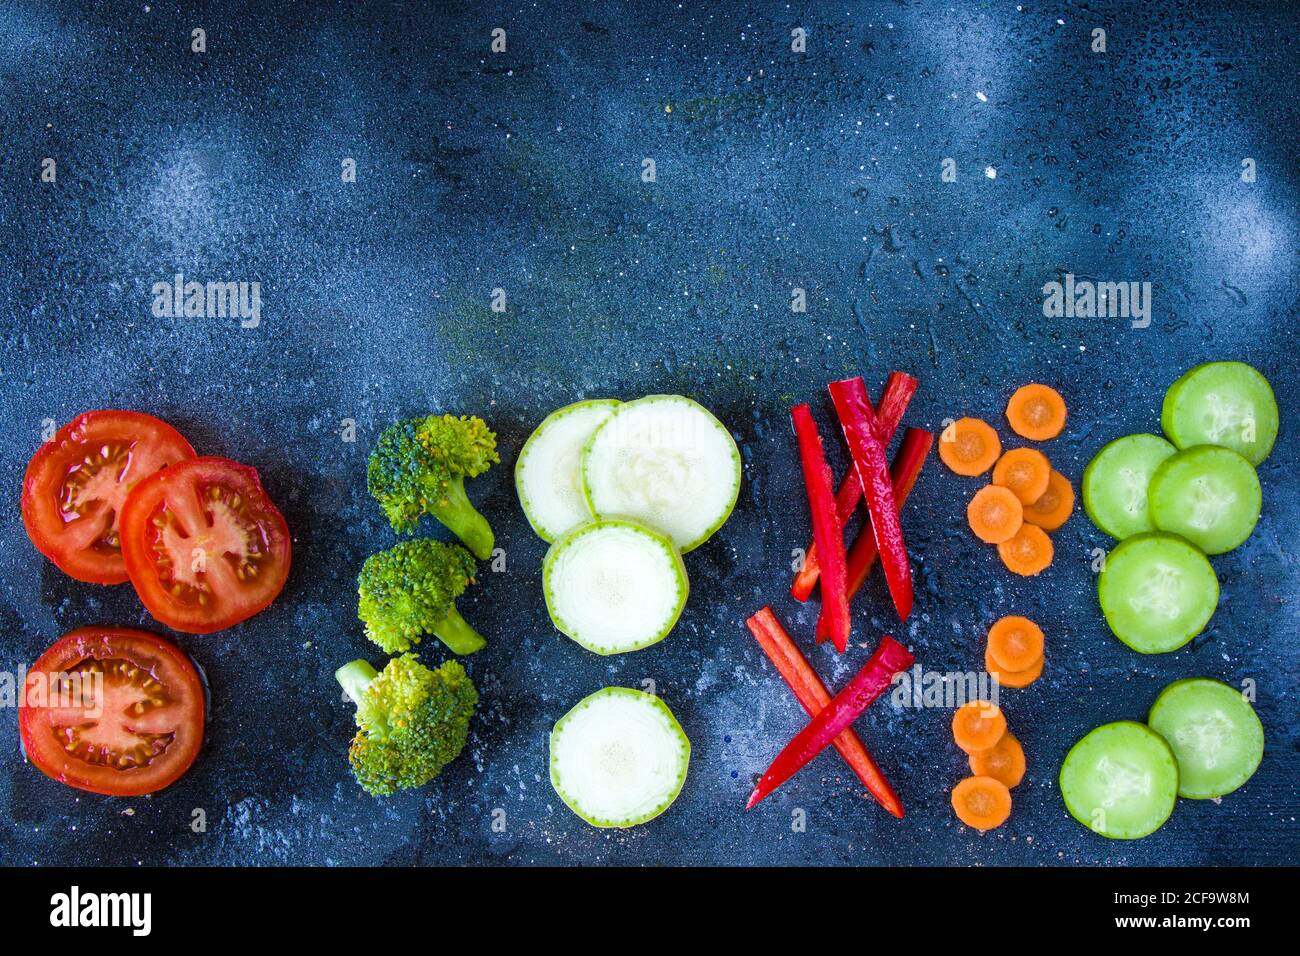 Chopped vegetables, sliced and cutting vegetables Stock Photo